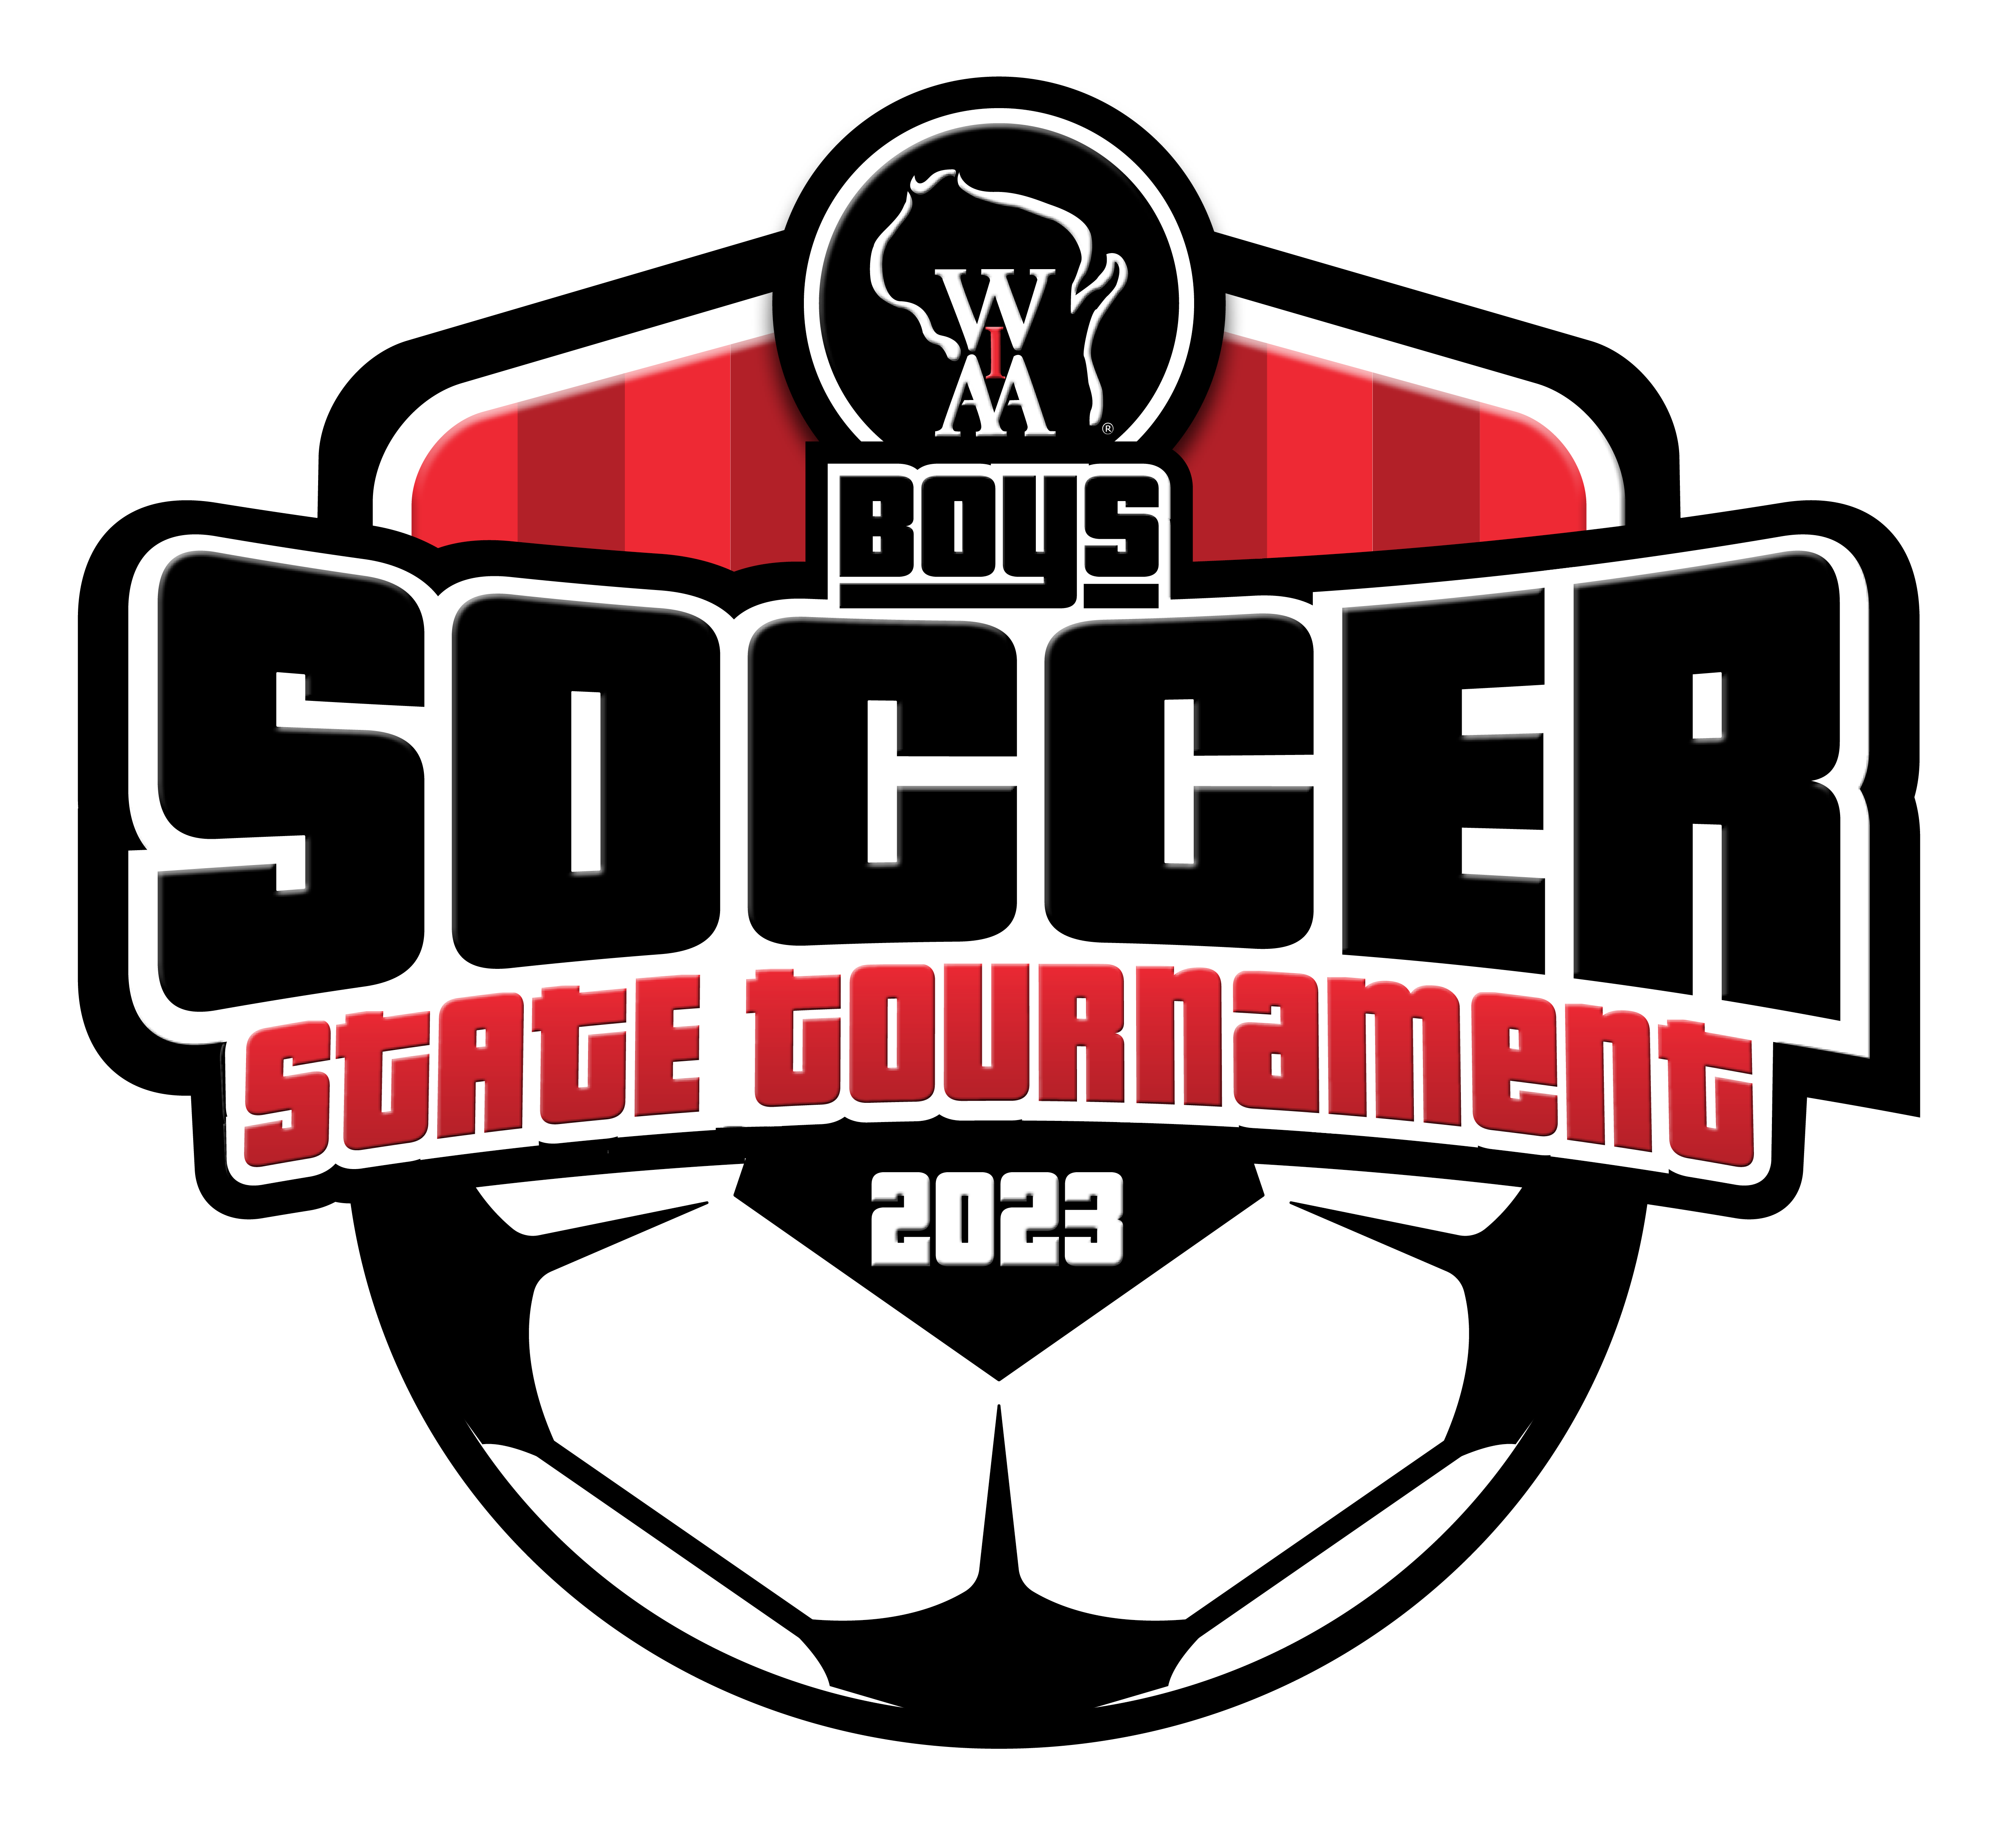 TODAY WIAA Boys Soccer Playoff Brackets Released